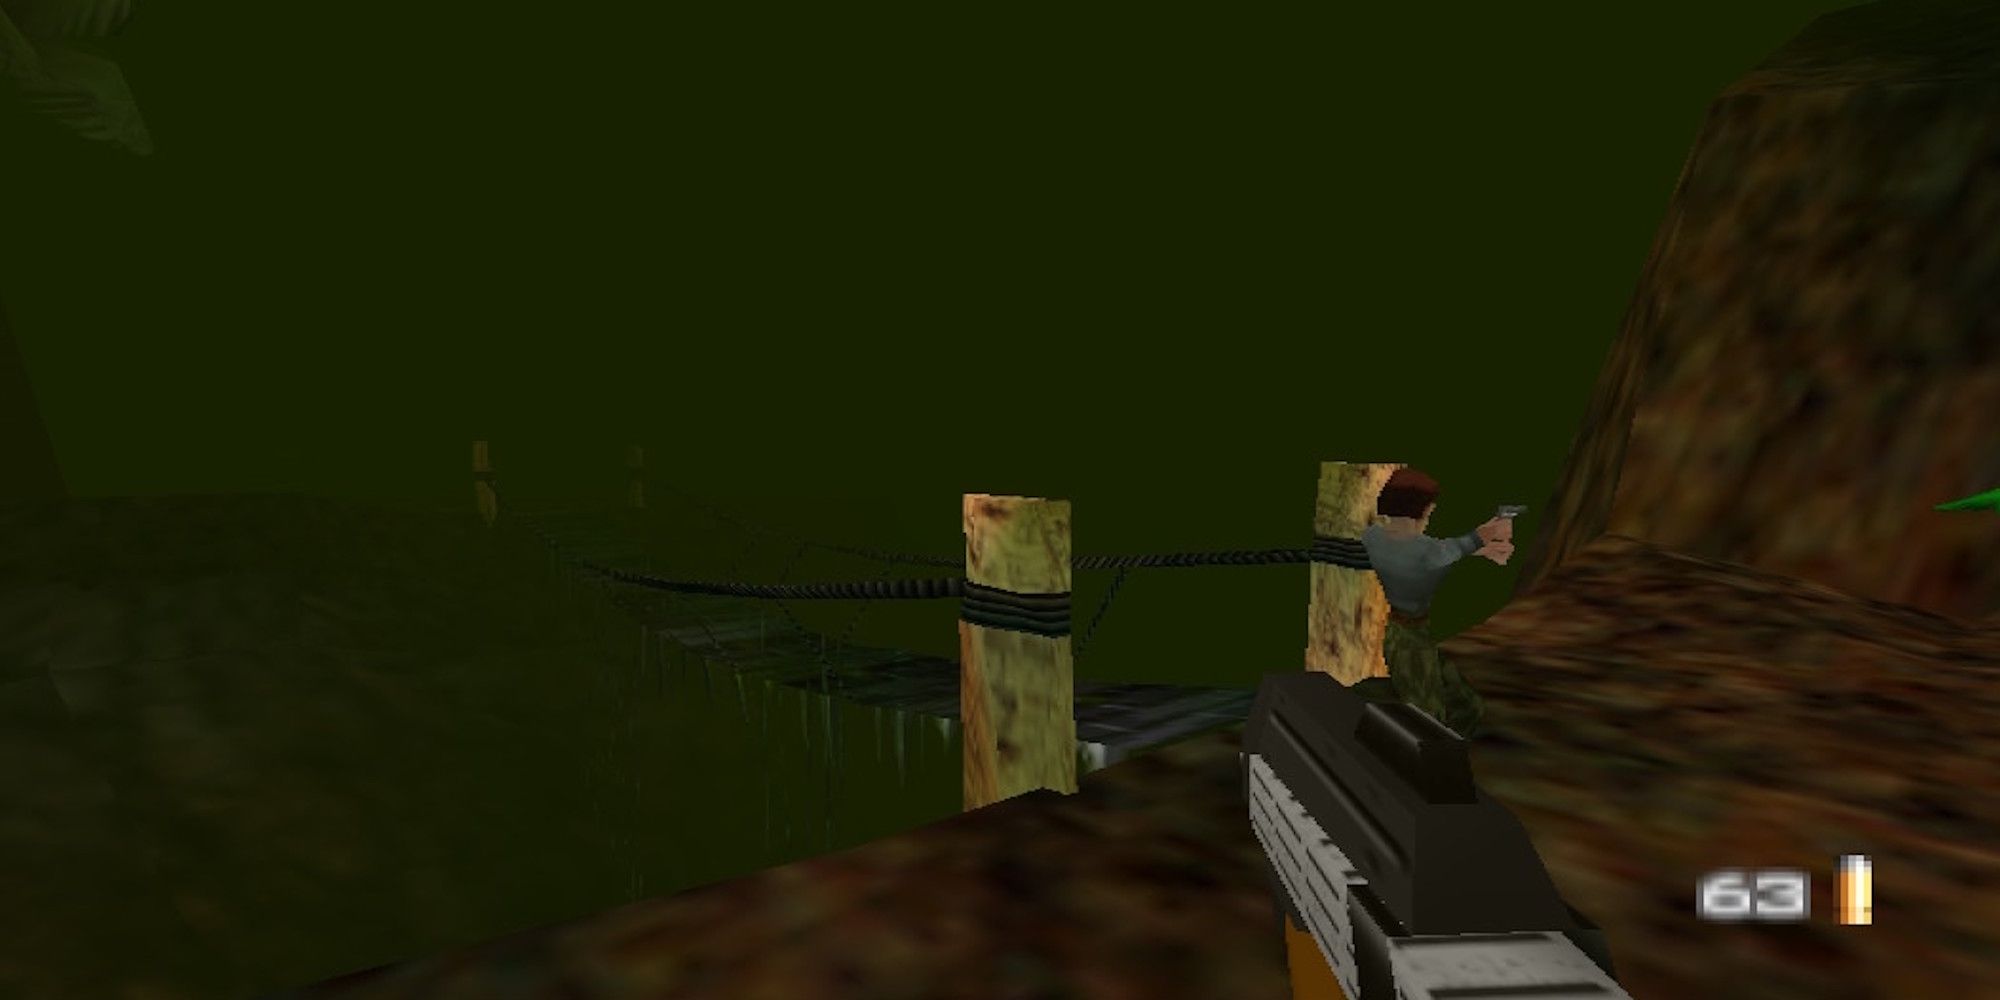 RCP-90 Equipped Goldeneye 007 Natalya in frame in Jungle level.